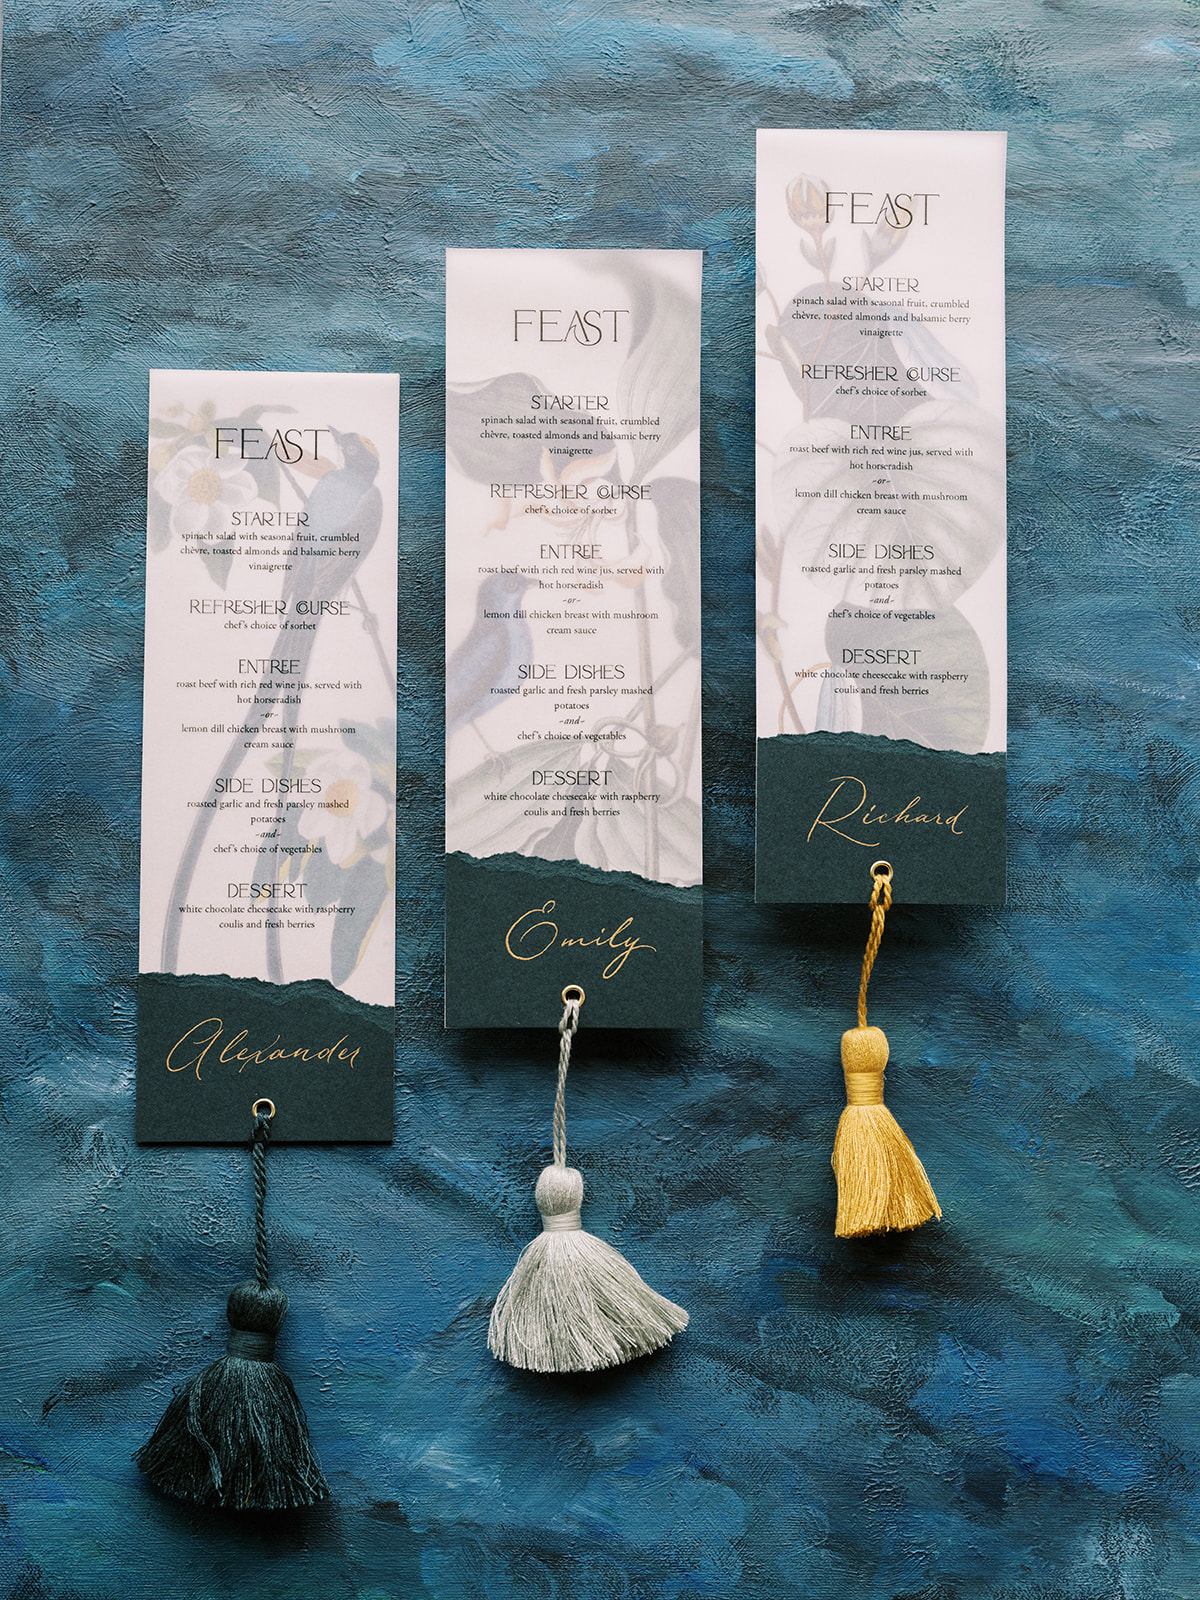 Contemporary wedding reception menu by PaperOcelot Sudios featuring Mediterranean-inspired decor in oceanic colour palette. 